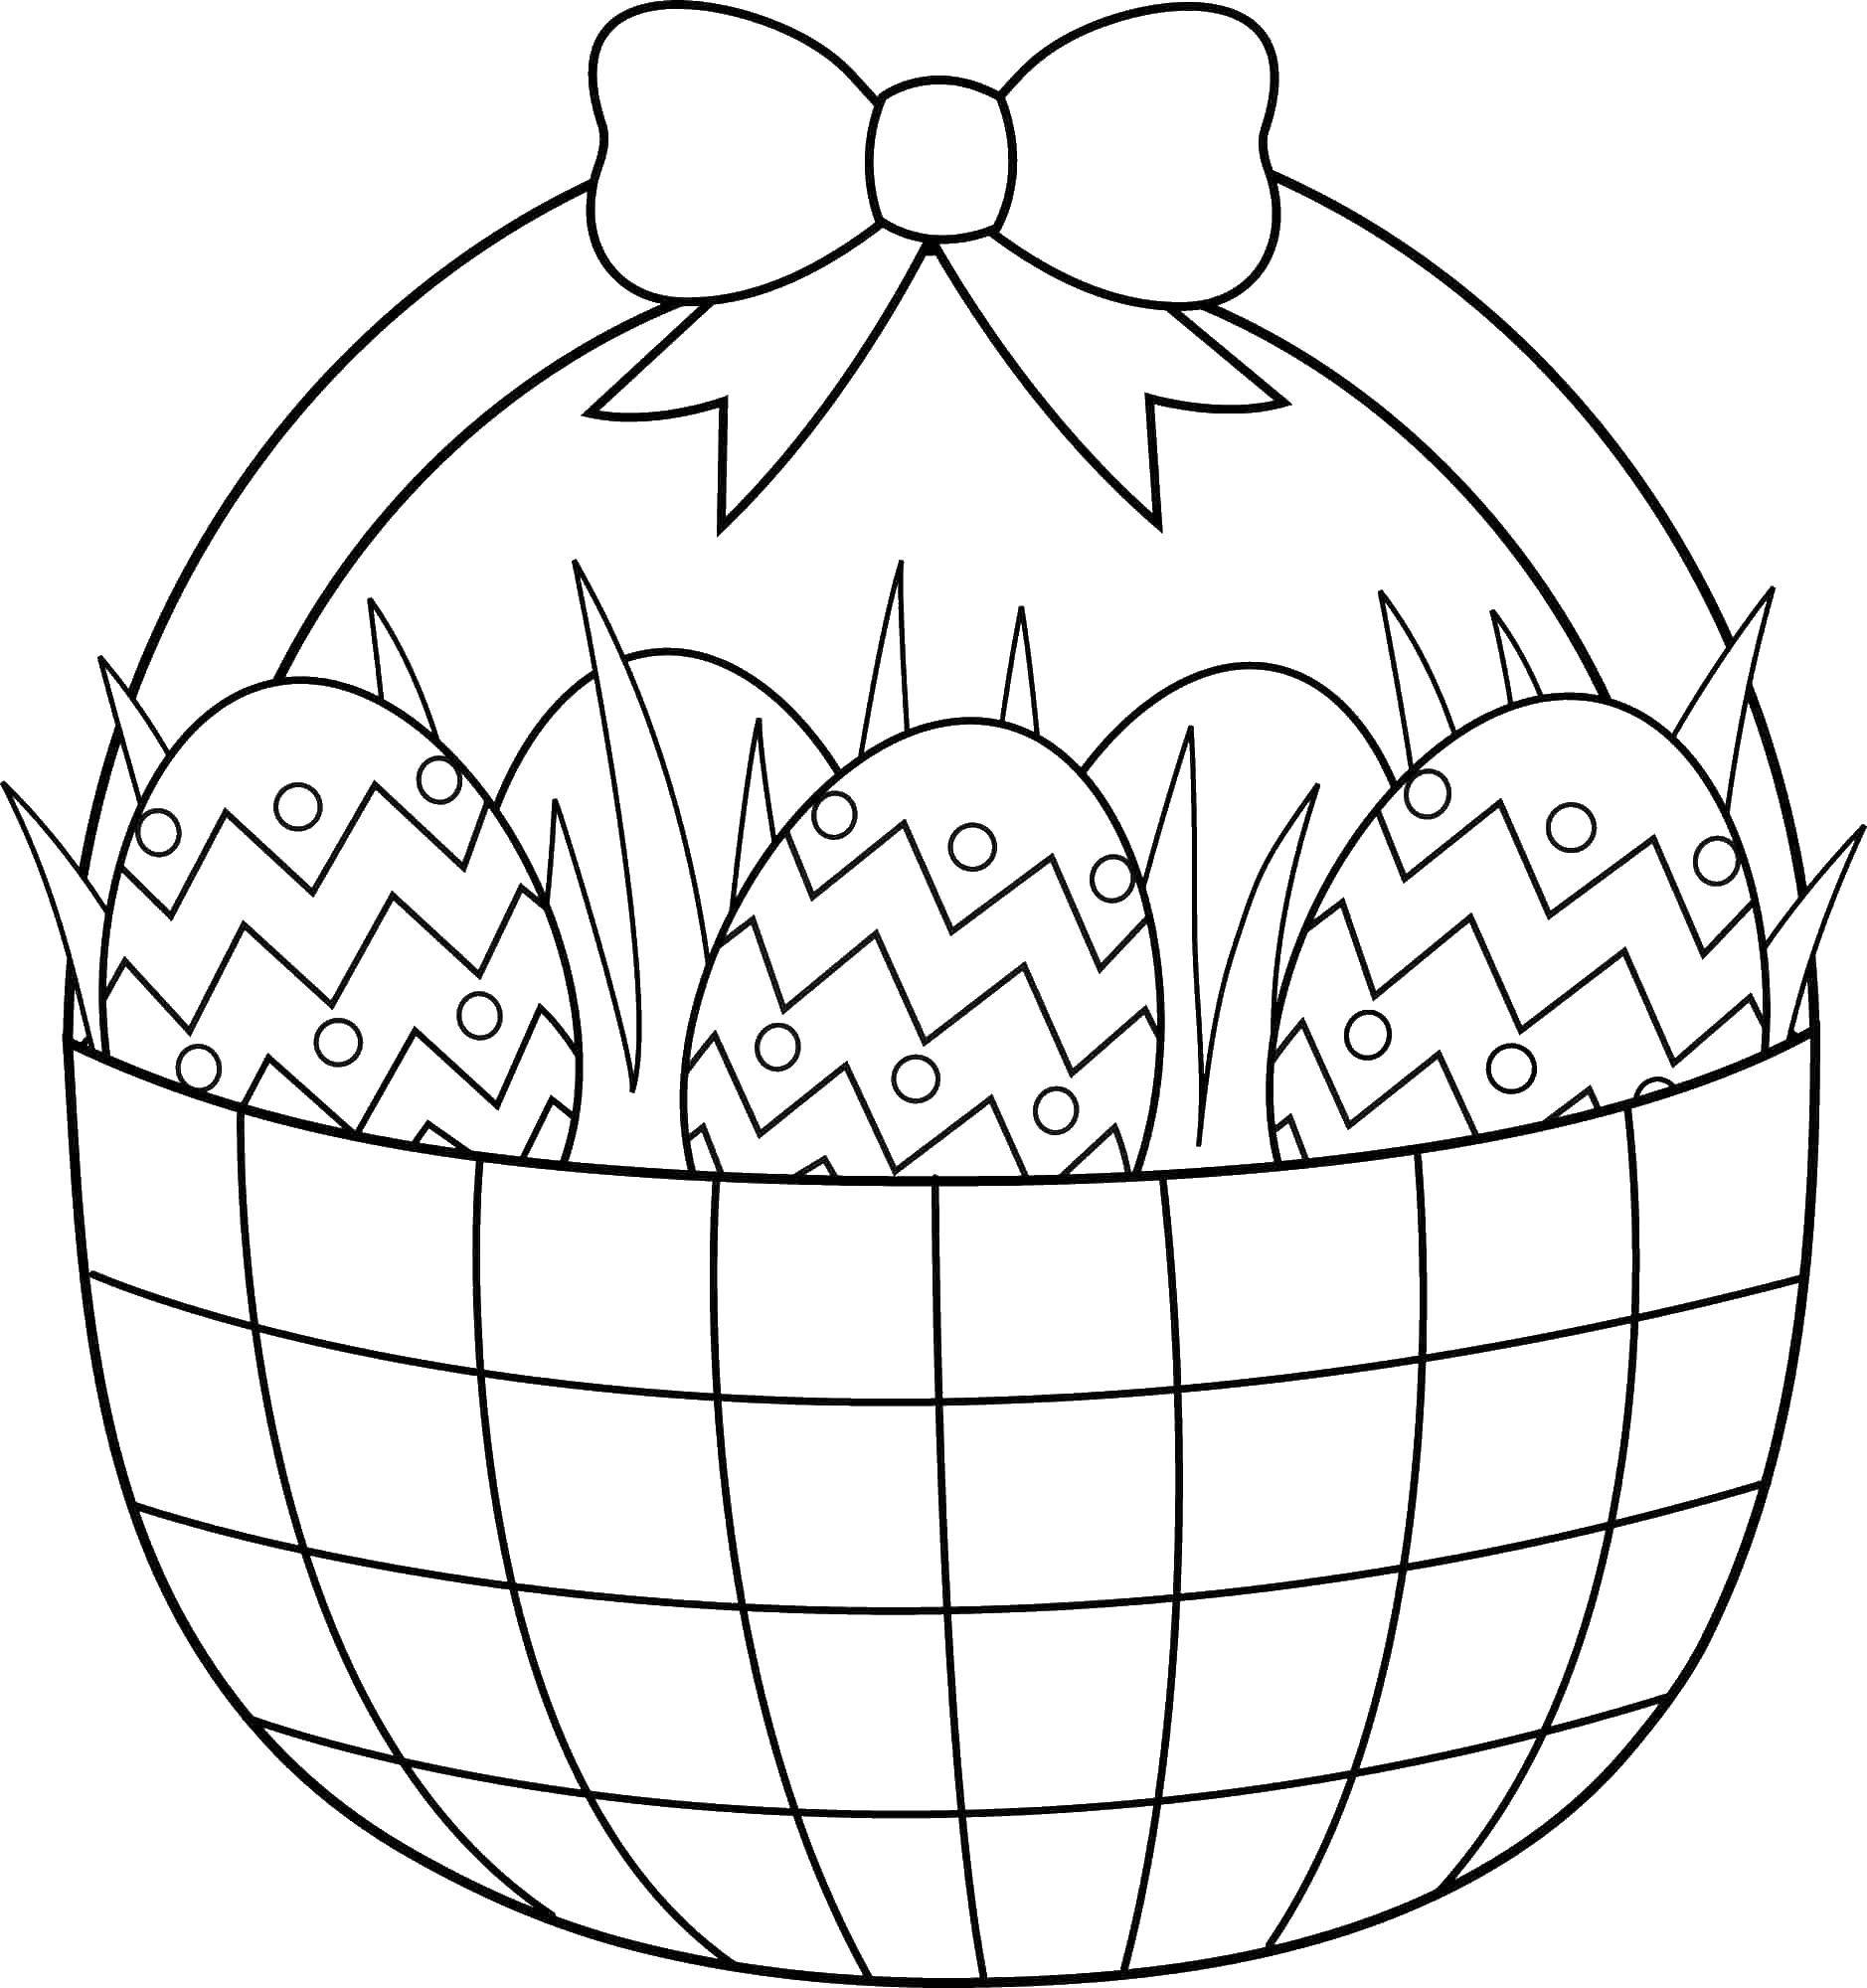 Coloring Basket of eggs with bow. Category Patterns for coloring eggs. Tags:  basket, egg, flower.